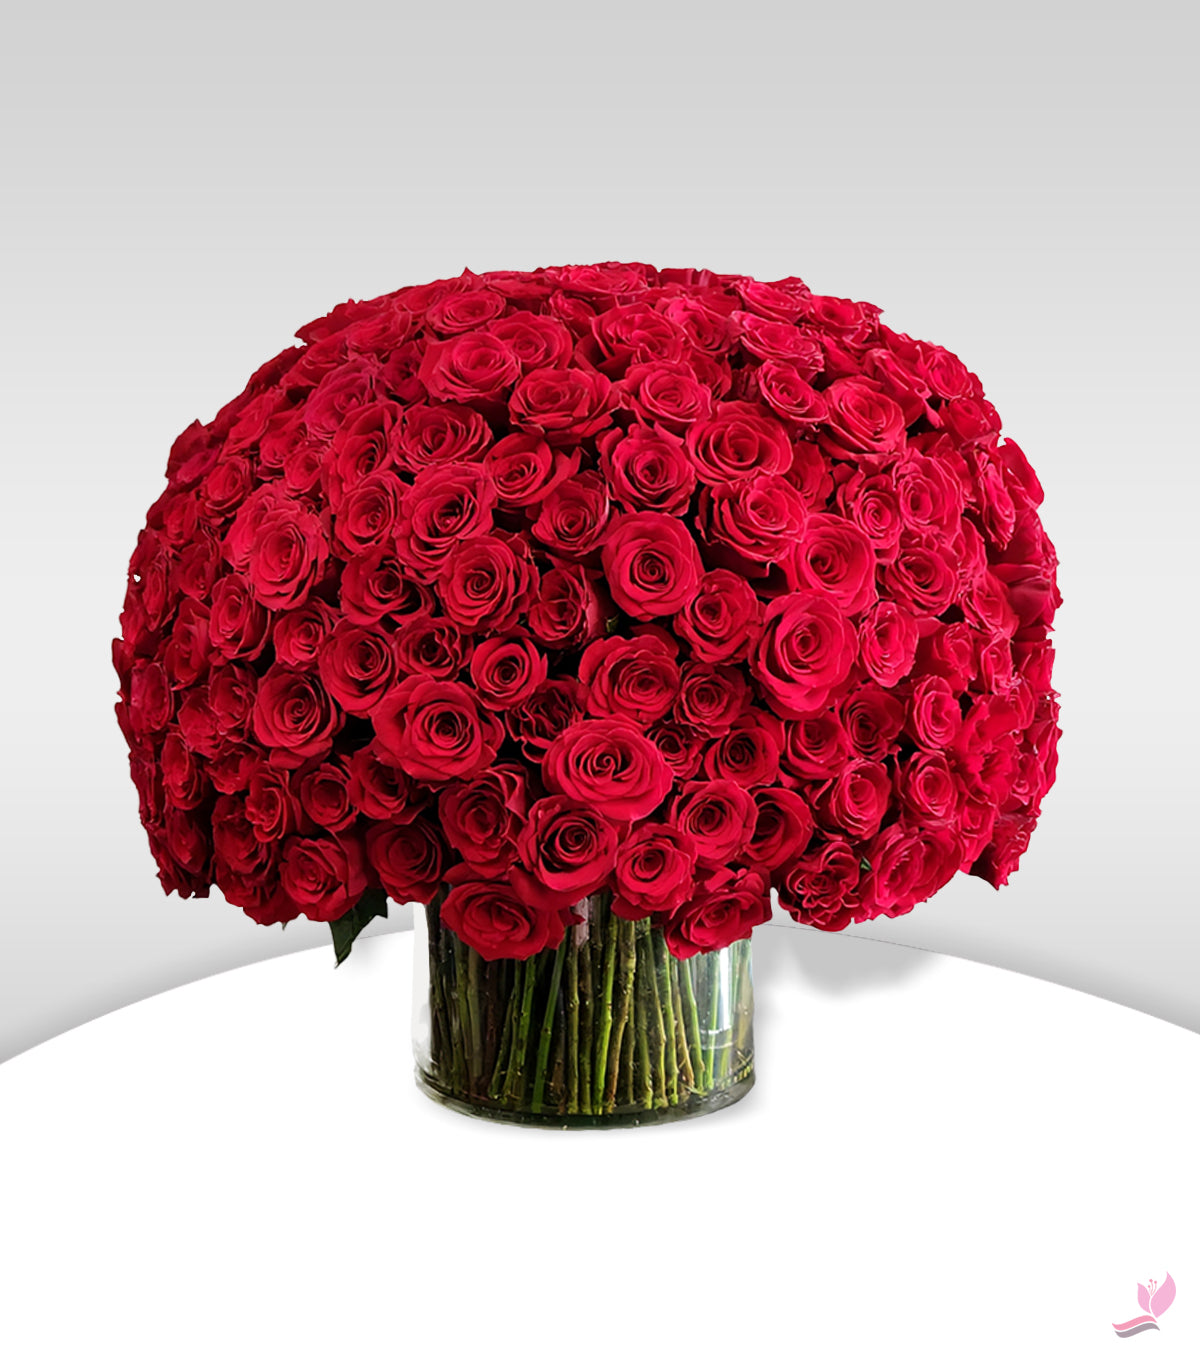 Red Roses With 200 Stems  - Arabianblossom - Fresh Cut Flowers - Same Day Delivery